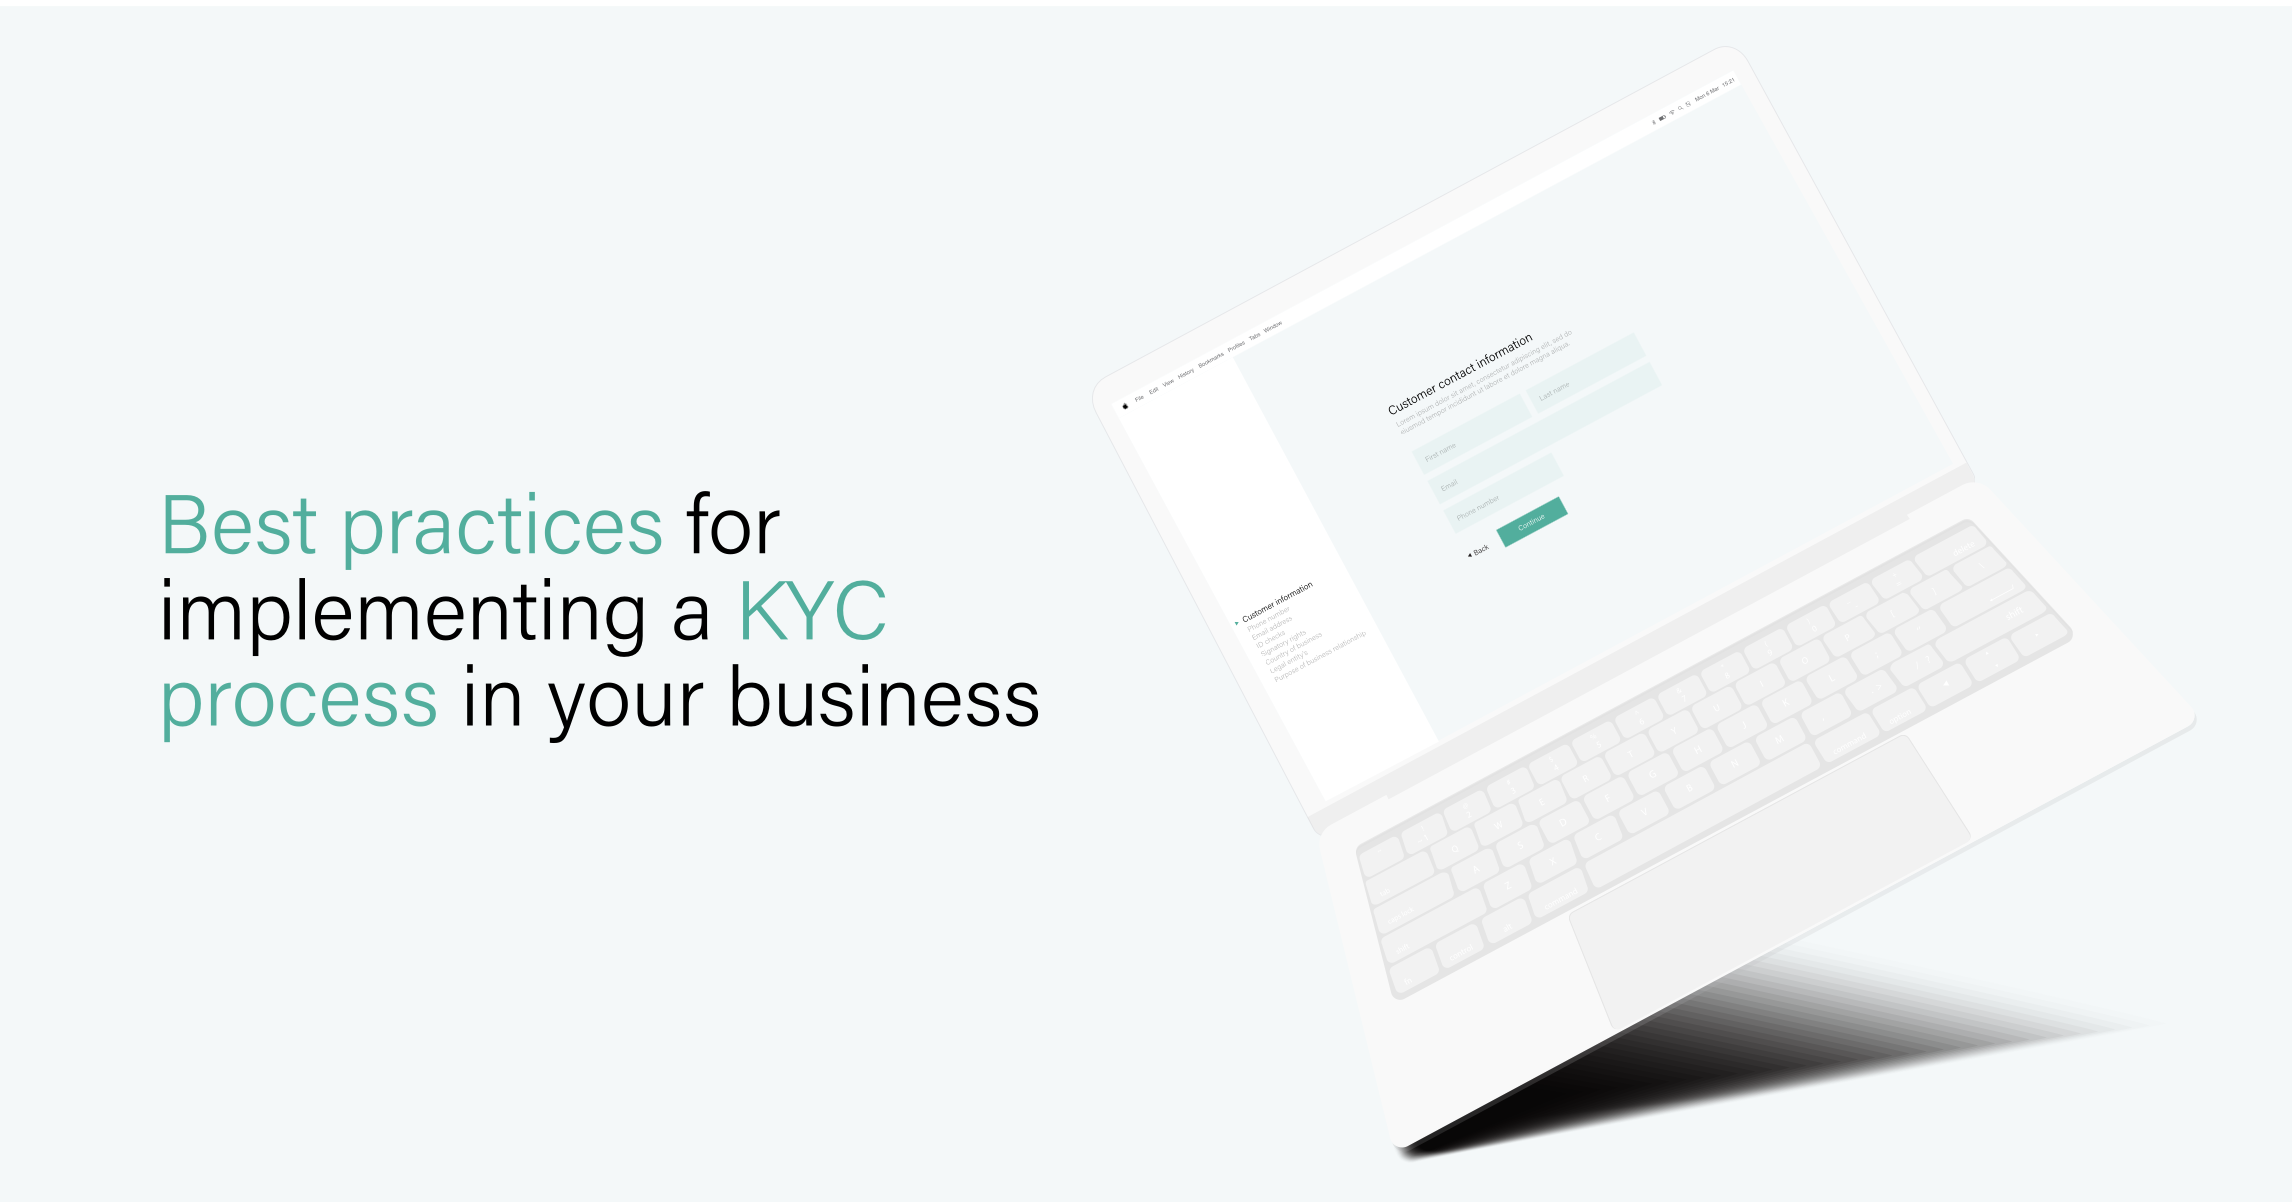 Best practices for implementing a KYC process in your business